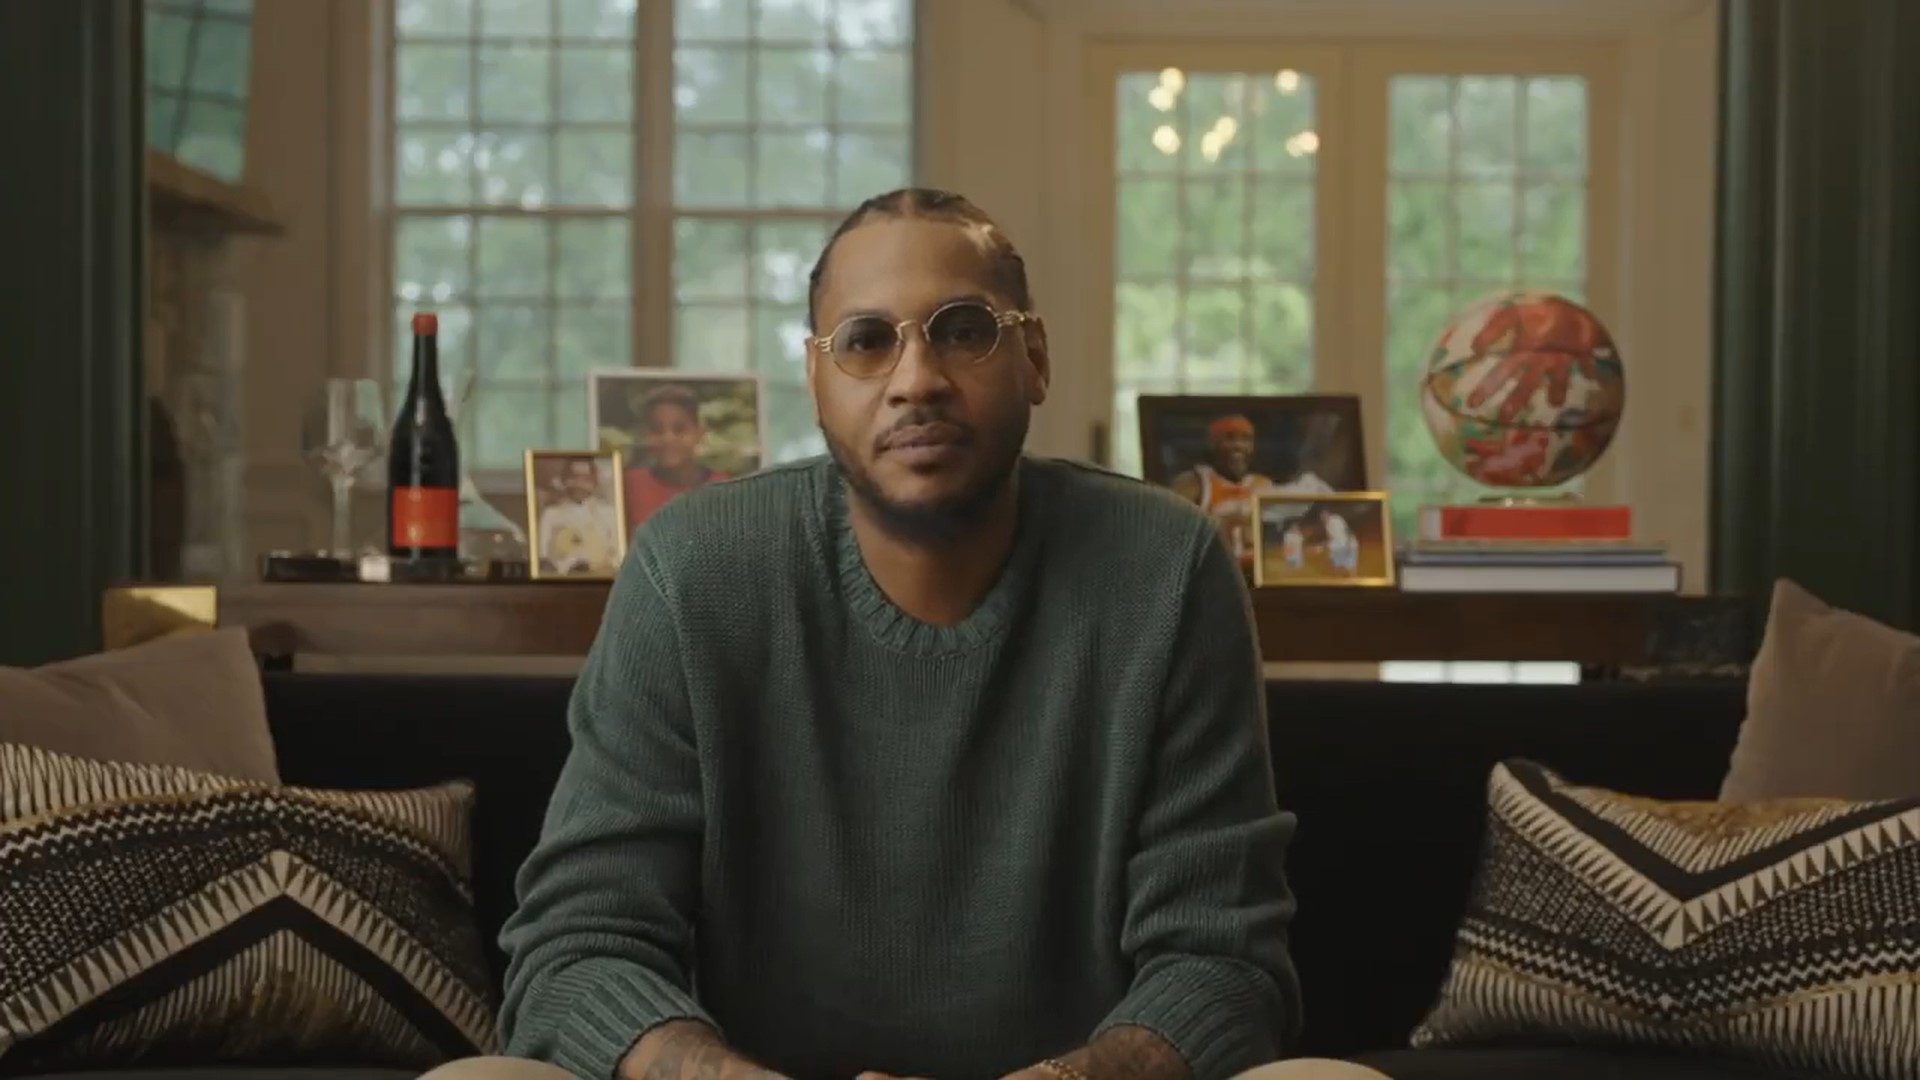 "Carmelo Anthony Retires A Look Back at the Career of the NBA Legend